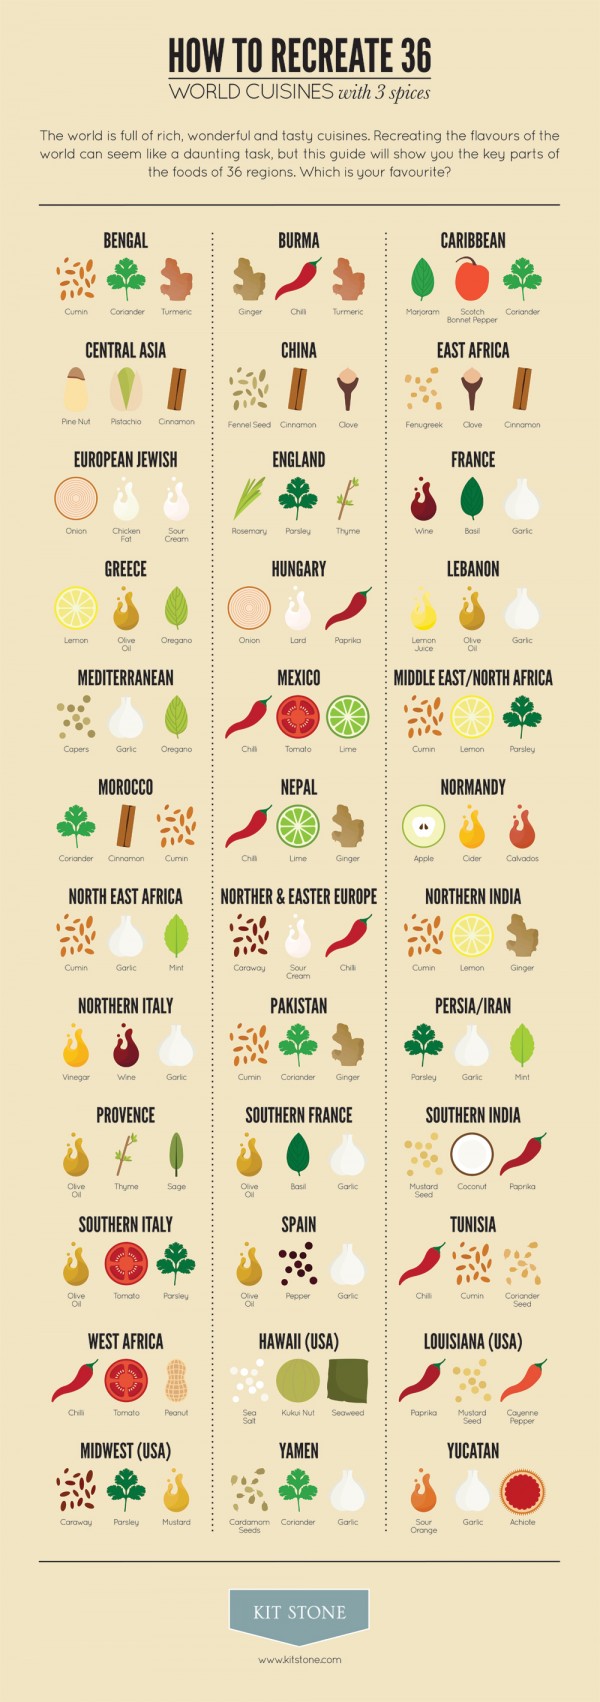 the-worlds-greatest-cuisines-in-3-spices_53a9d451b62f9